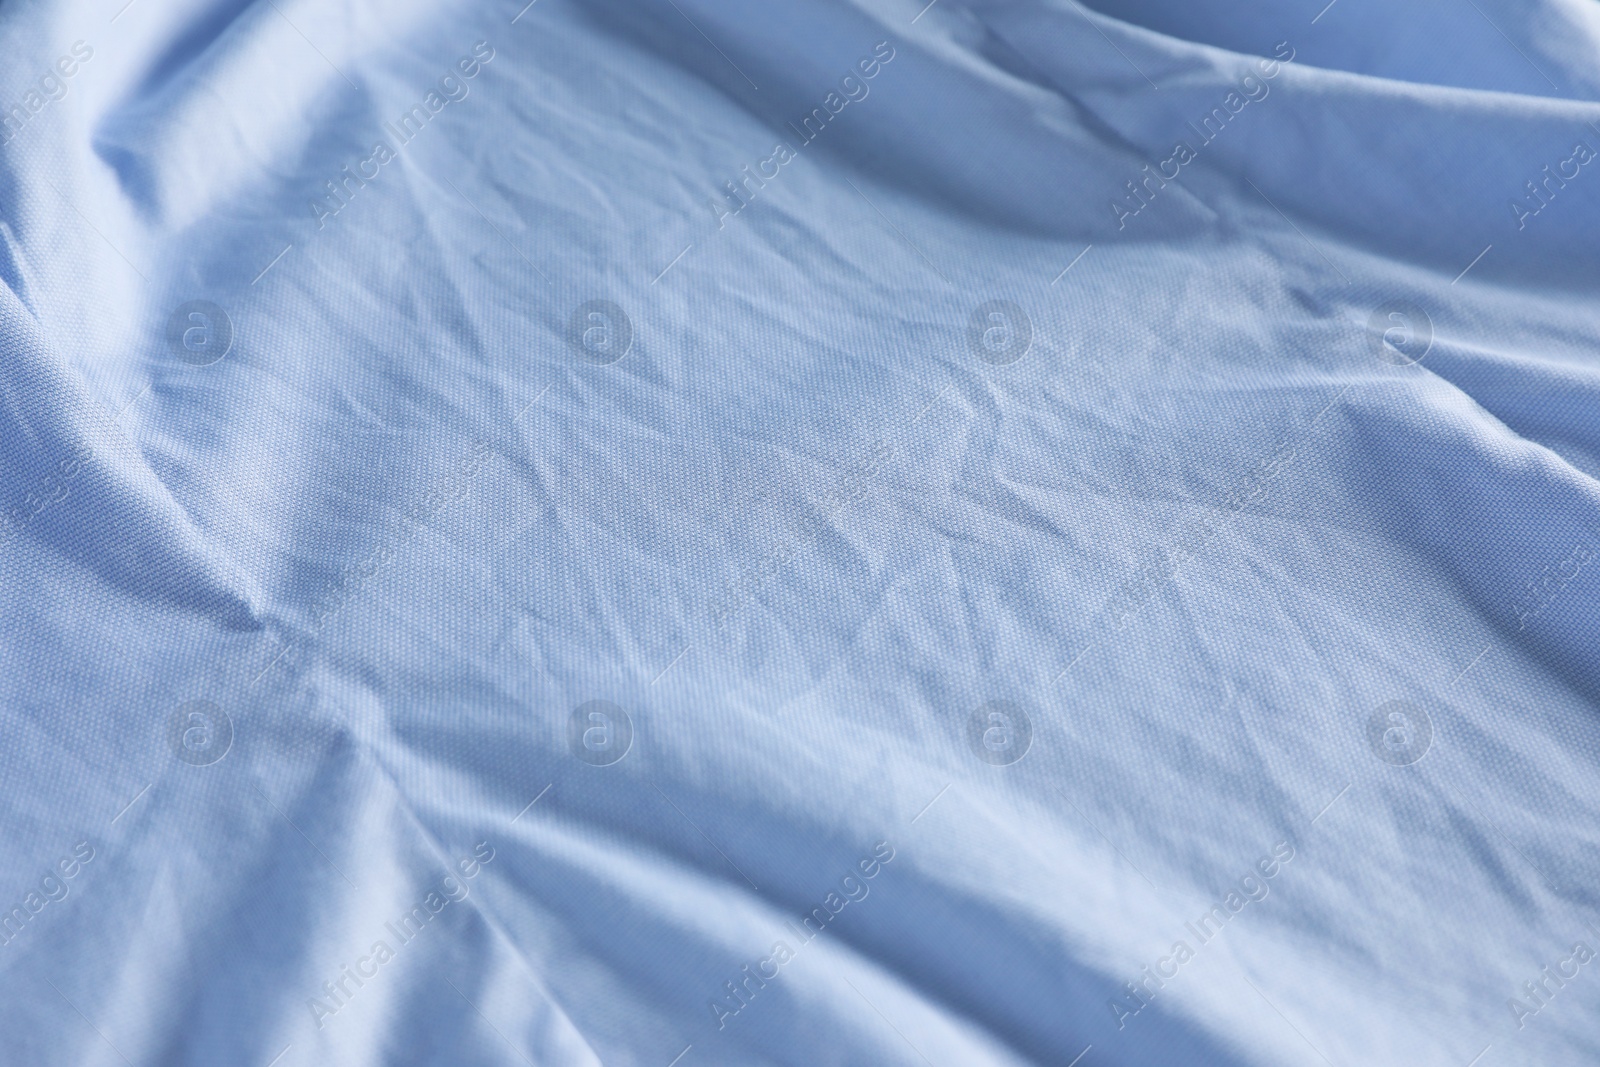 Photo of Crumpled light blue fabric as background, closeup view